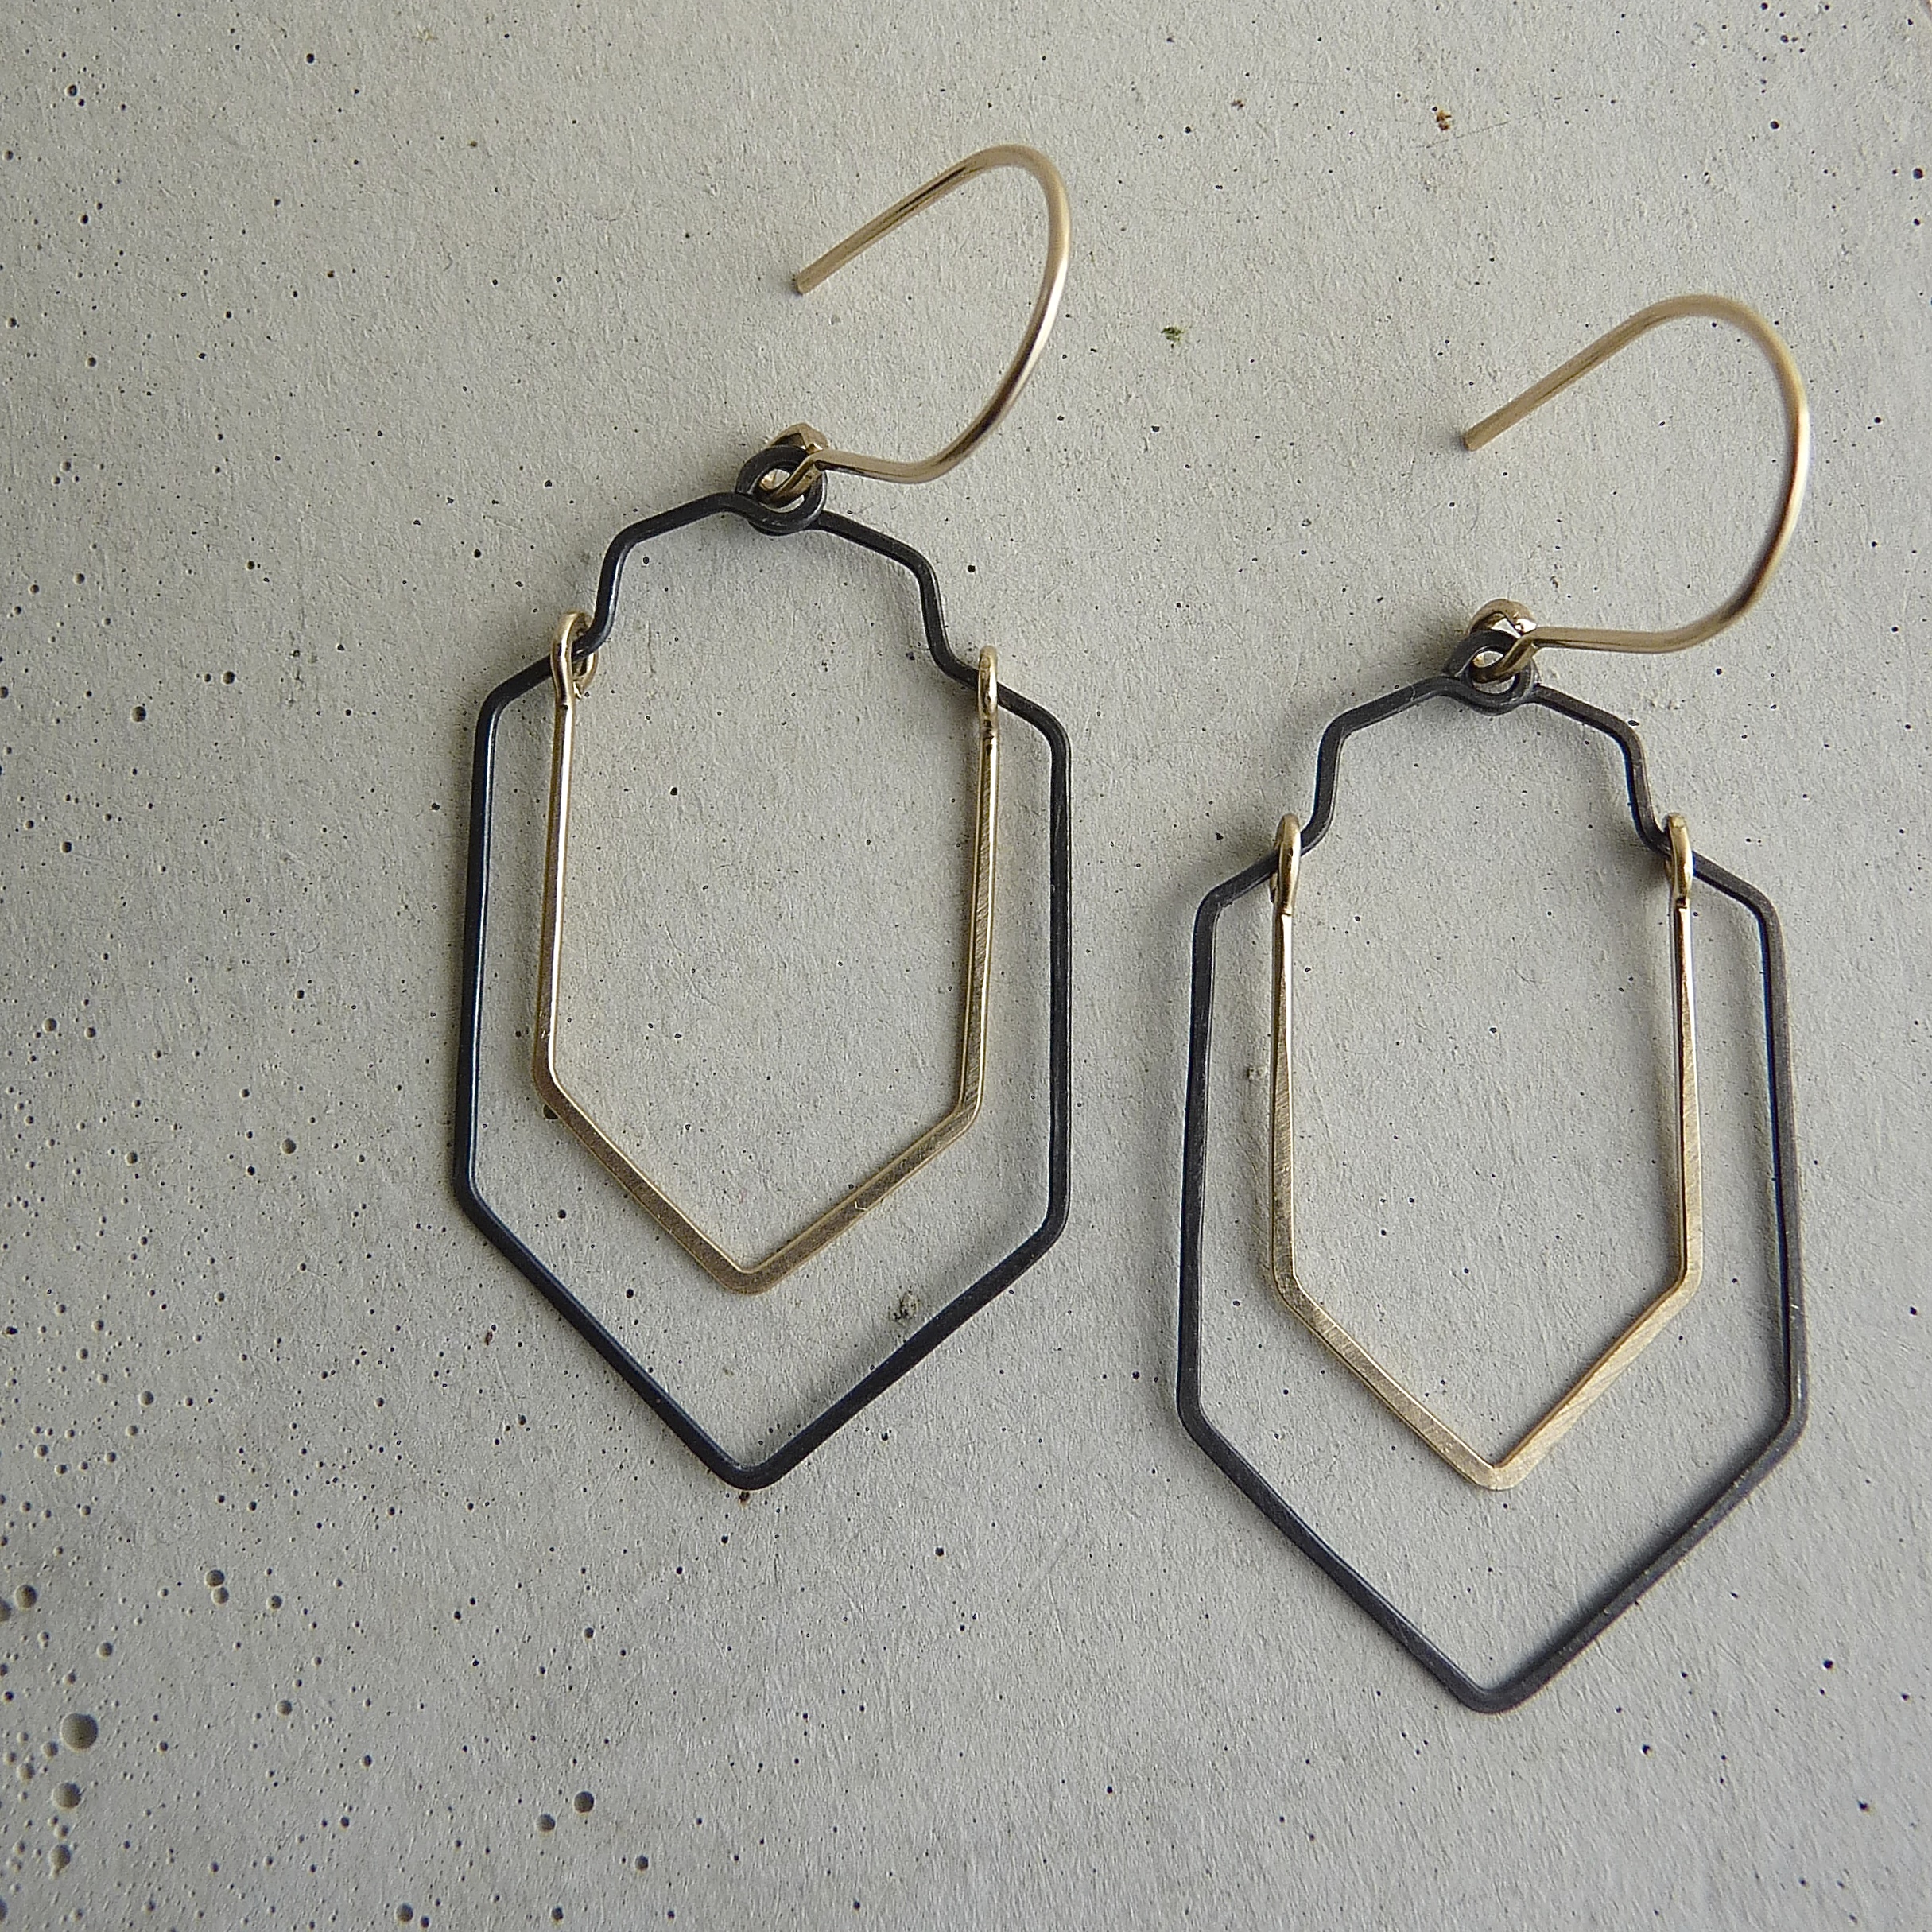 valley earrings, gold and black, modern contemporary, hammered earrings, geometric jewelry, new refined basics